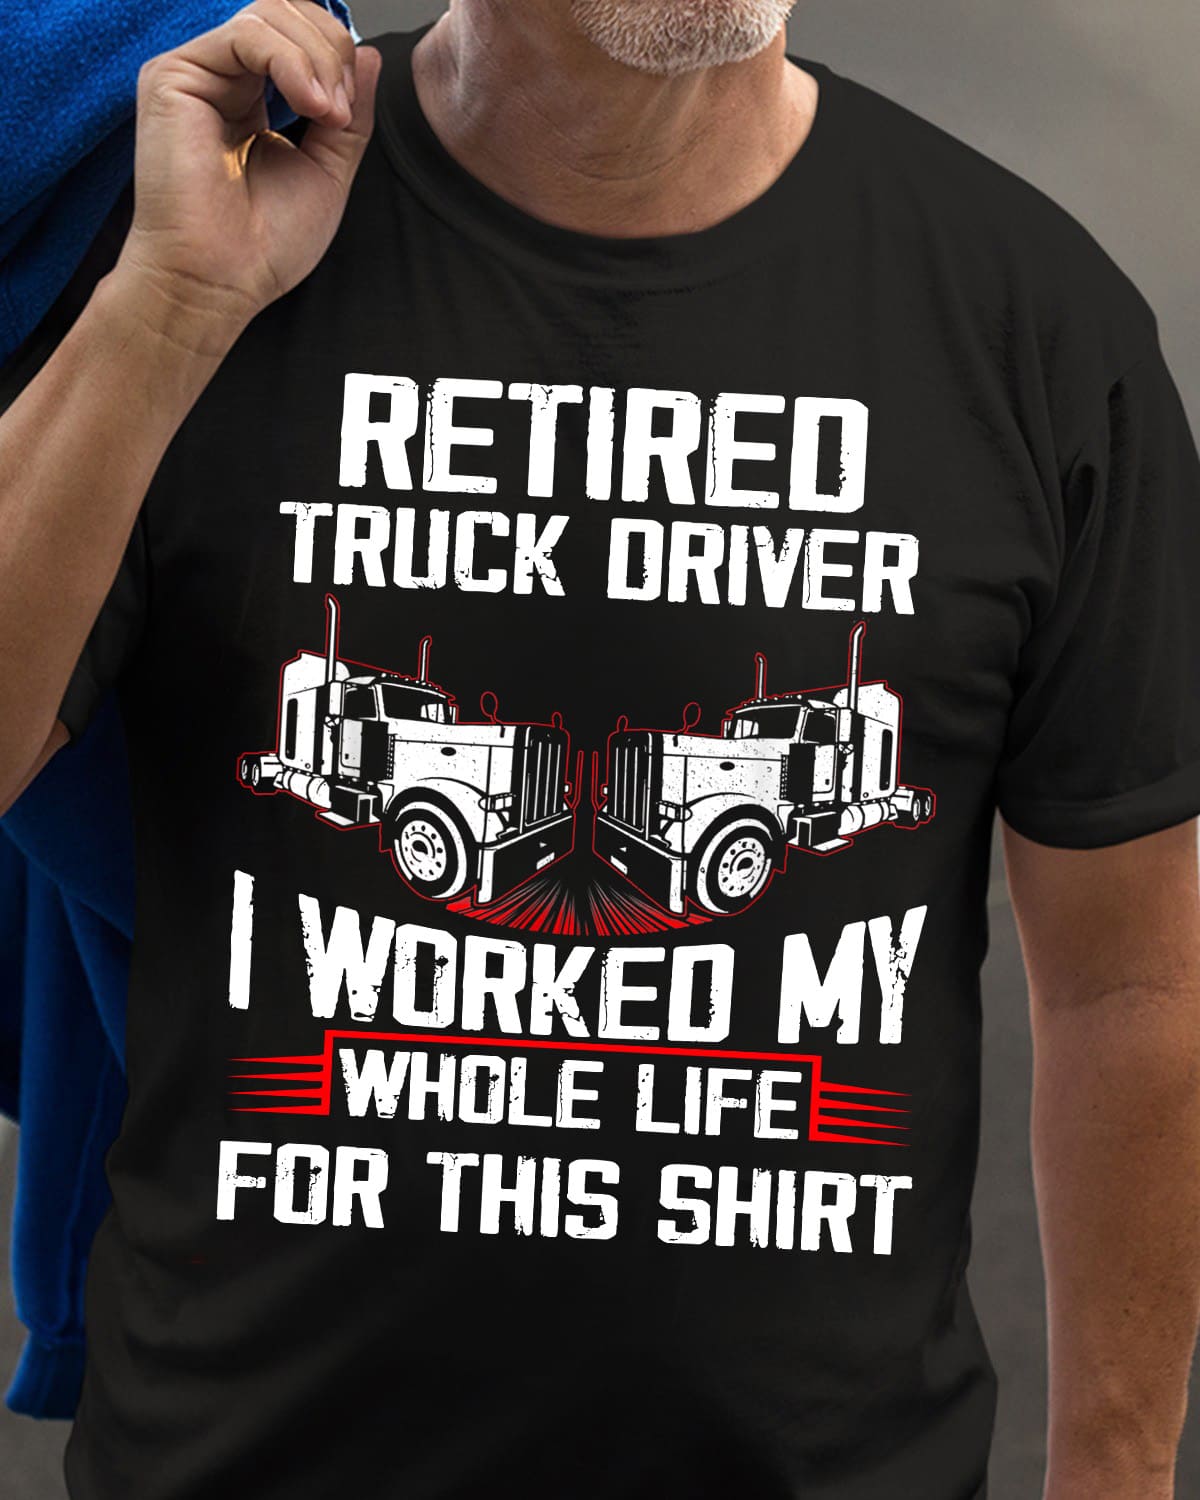 Retired truck driver I worked my whole life for this shirt - Retired people gift, truck driver the job